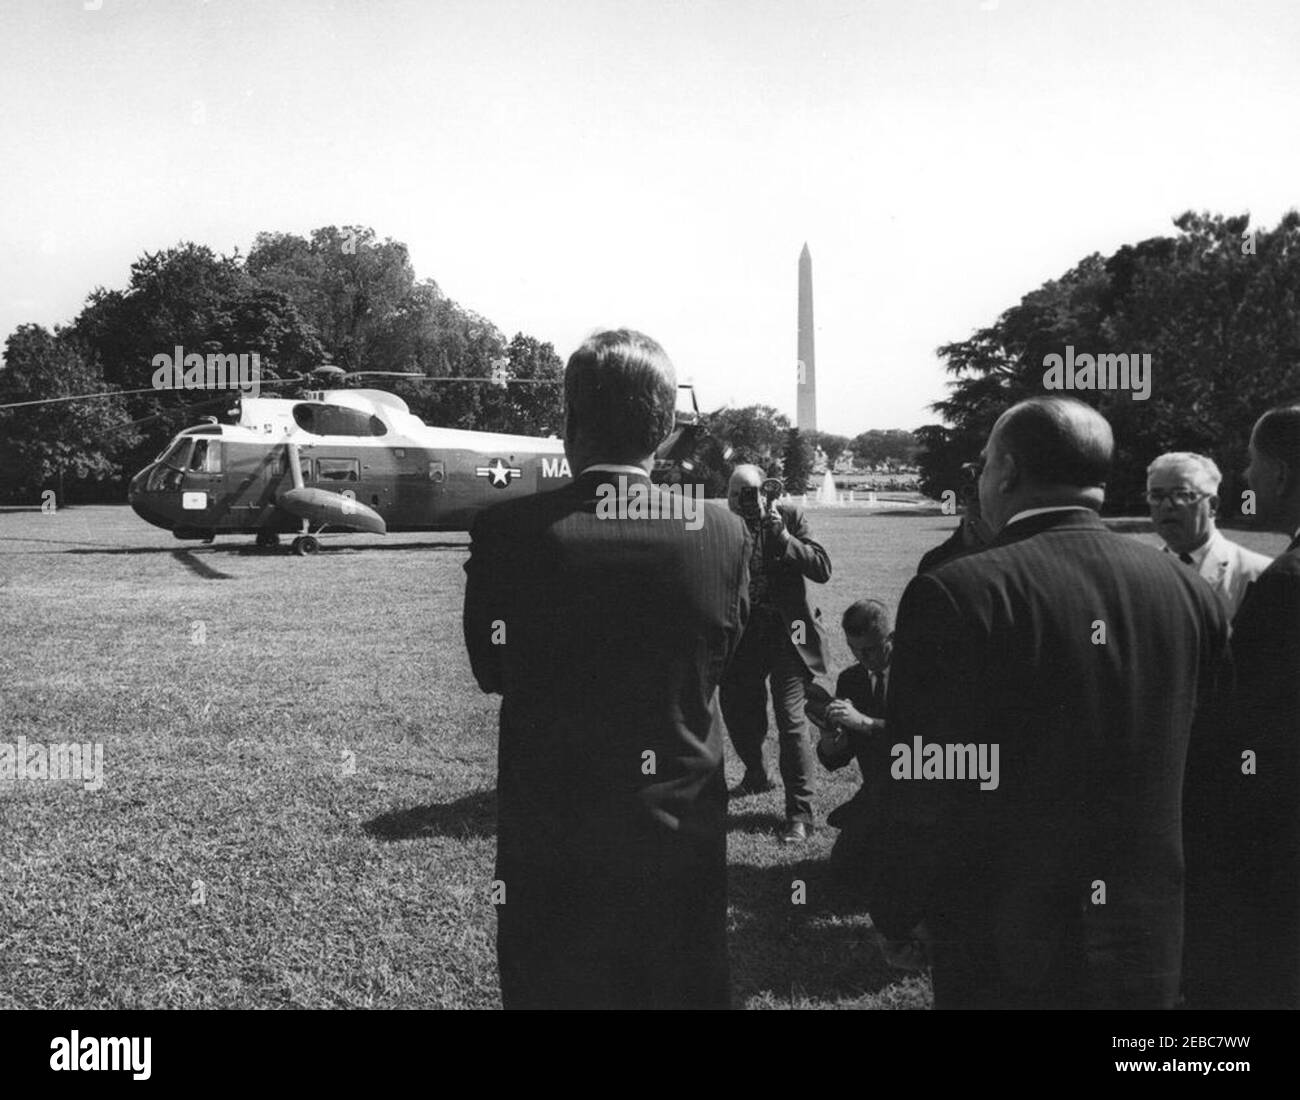 Ceremony marking Vice President Lyndon B. Johnsonu0027s (LBJ) departure on a good-will trip, 3:30PM. President John F. Kennedy watches as Vice President Lyndon B. Johnsonu2019s helicopter prepares to depart the South Lawn for his good-will trip to Lebanon, Iran, Turkey, Greece, Cyprus, and Italy. Ambassador of Nicaragua and Dean of the Diplomatic Corps, Dr. Guillermo Sevilla-Sacasa, stands at right (back to camera); unidentified photographers and reporters observe. White House, Washington, D.C. Stock Photo